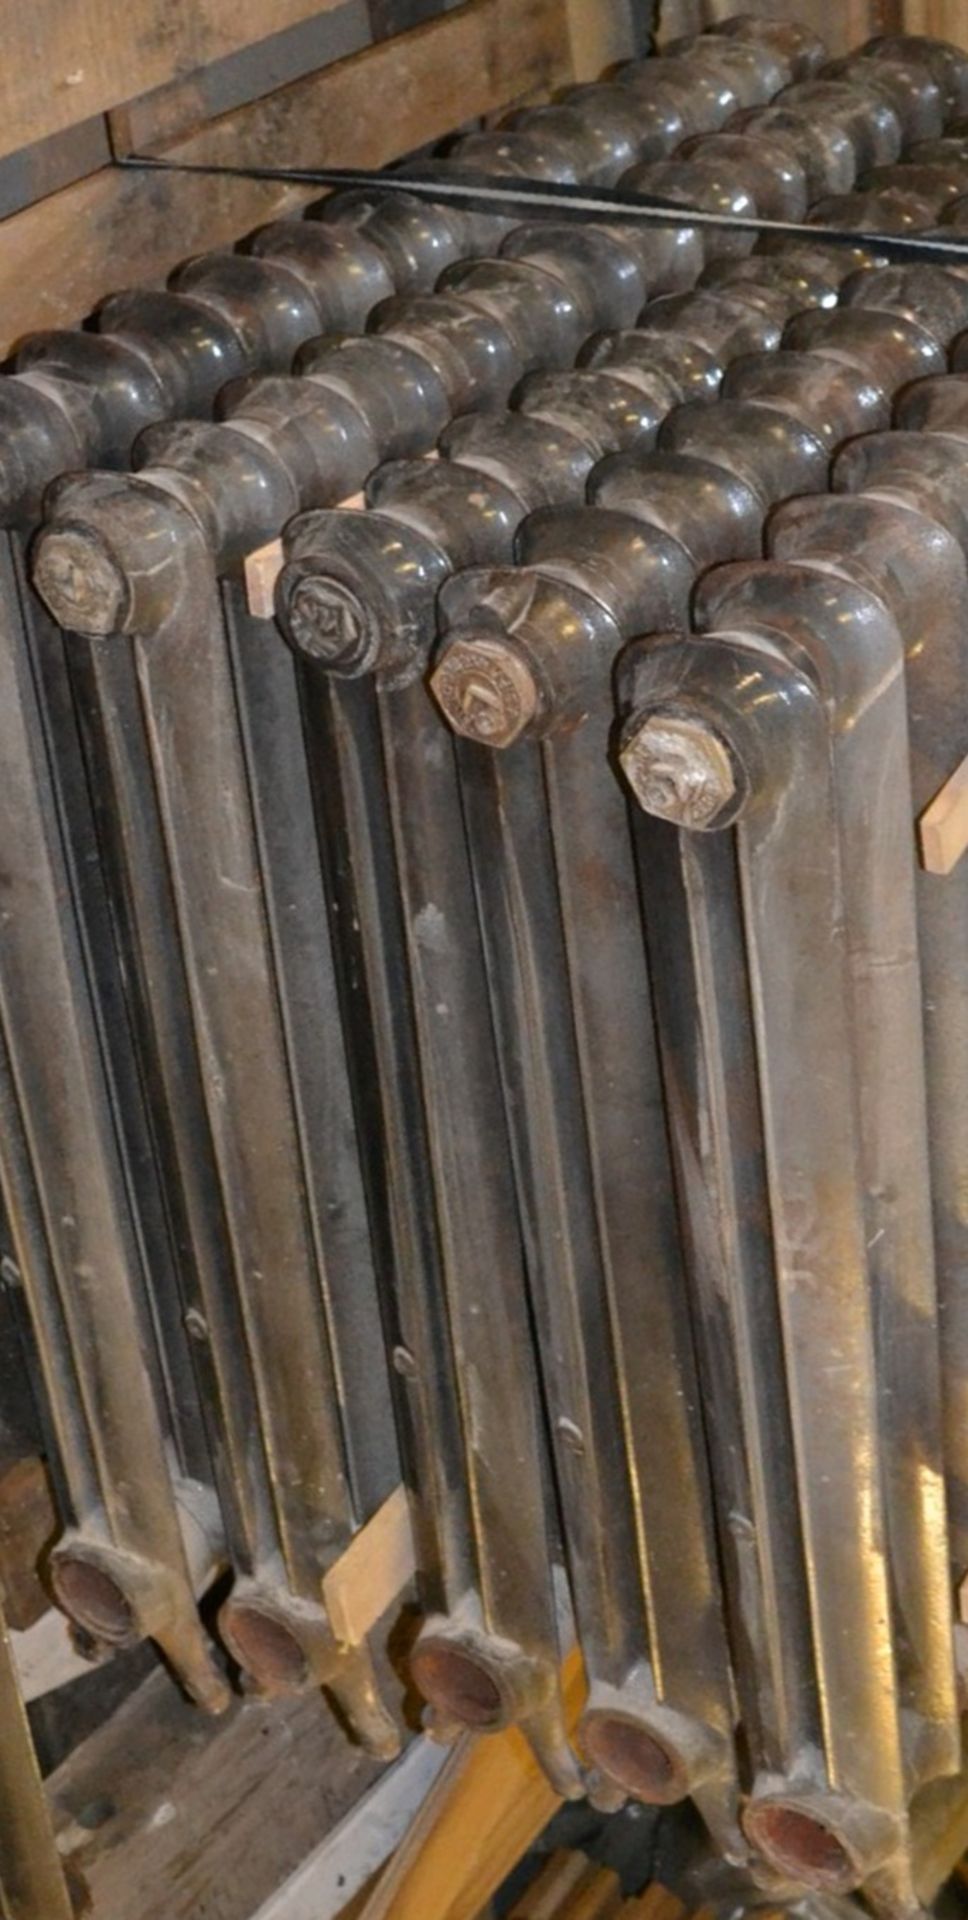 1 x Vintage Traditional Cast Iron 9-Section Radiator - Dimensions: W70 x H95cm - Ref: HM264/9sec - Image 4 of 6